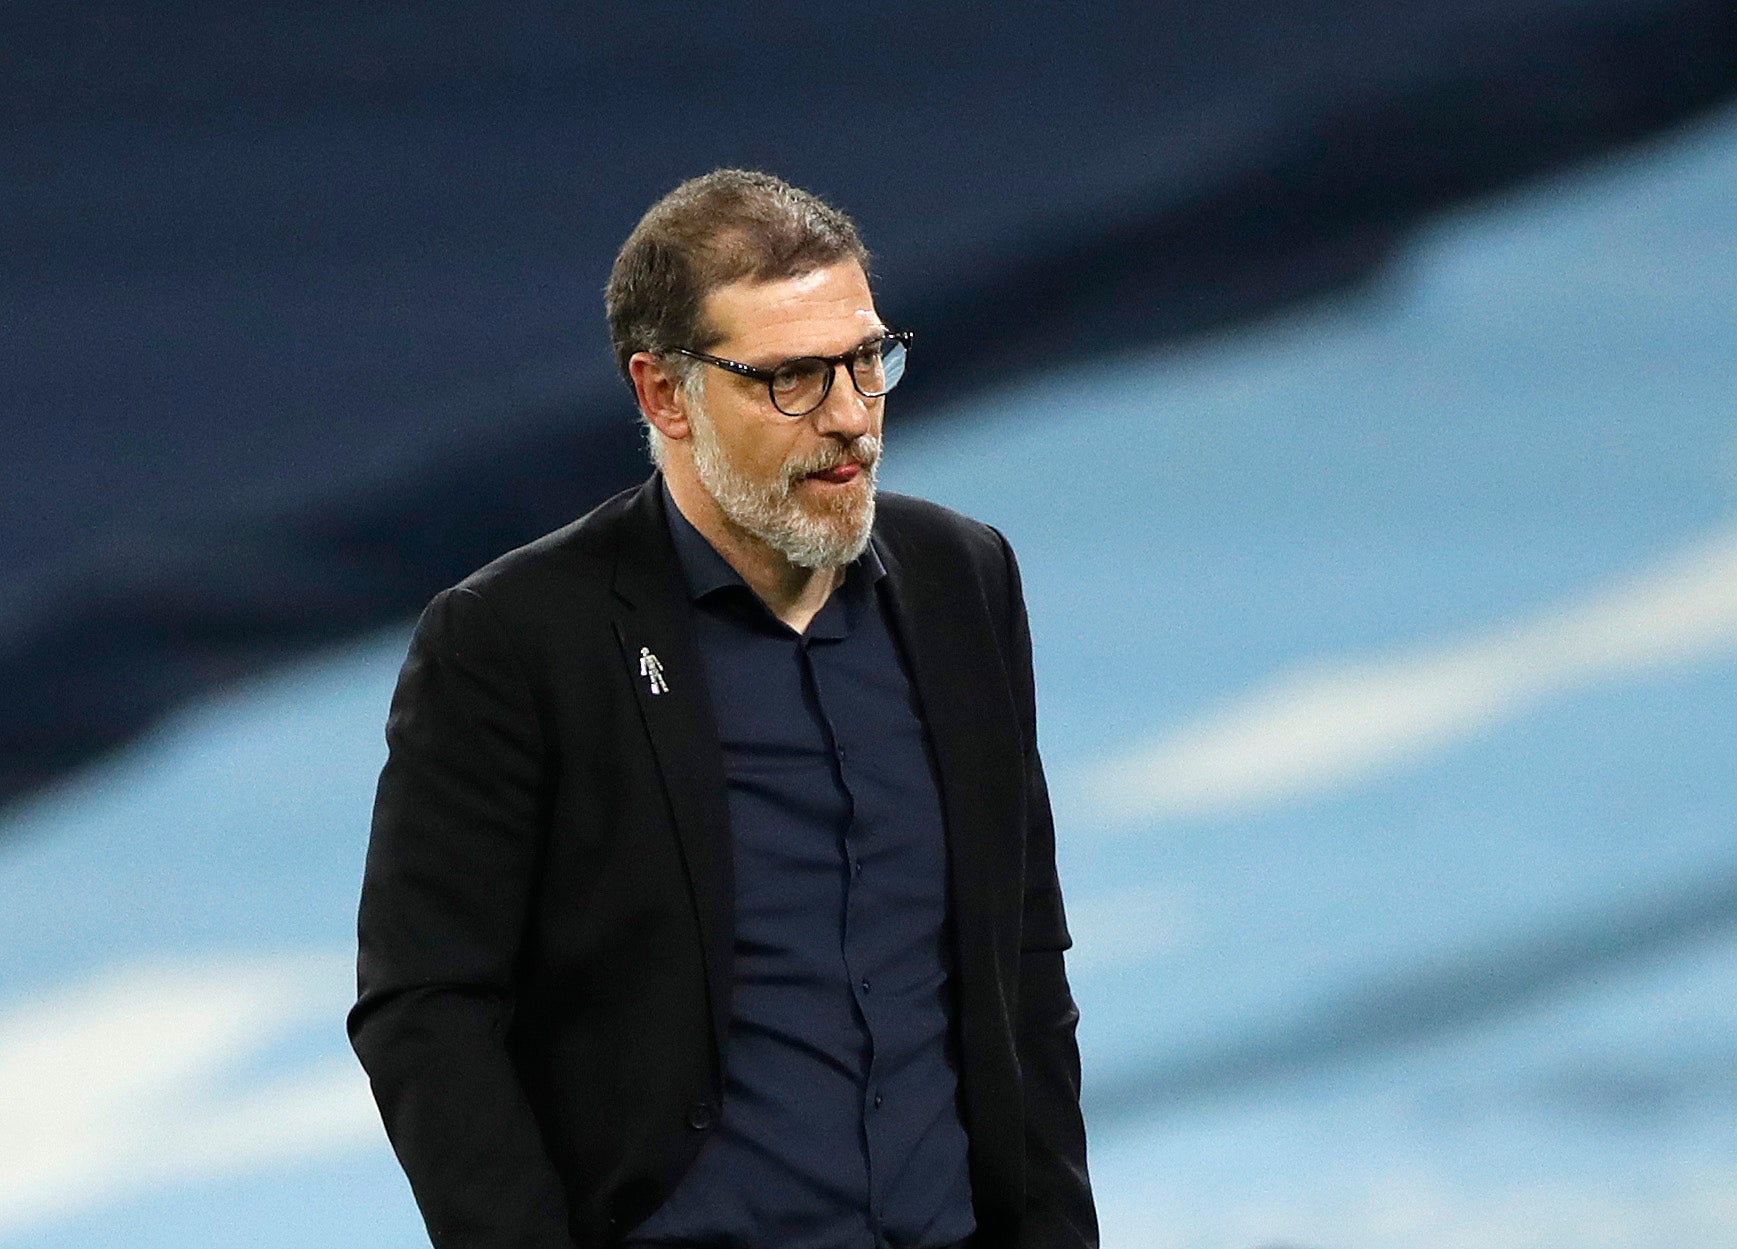 Slaven Bilic is facing the sack as West Brom manager